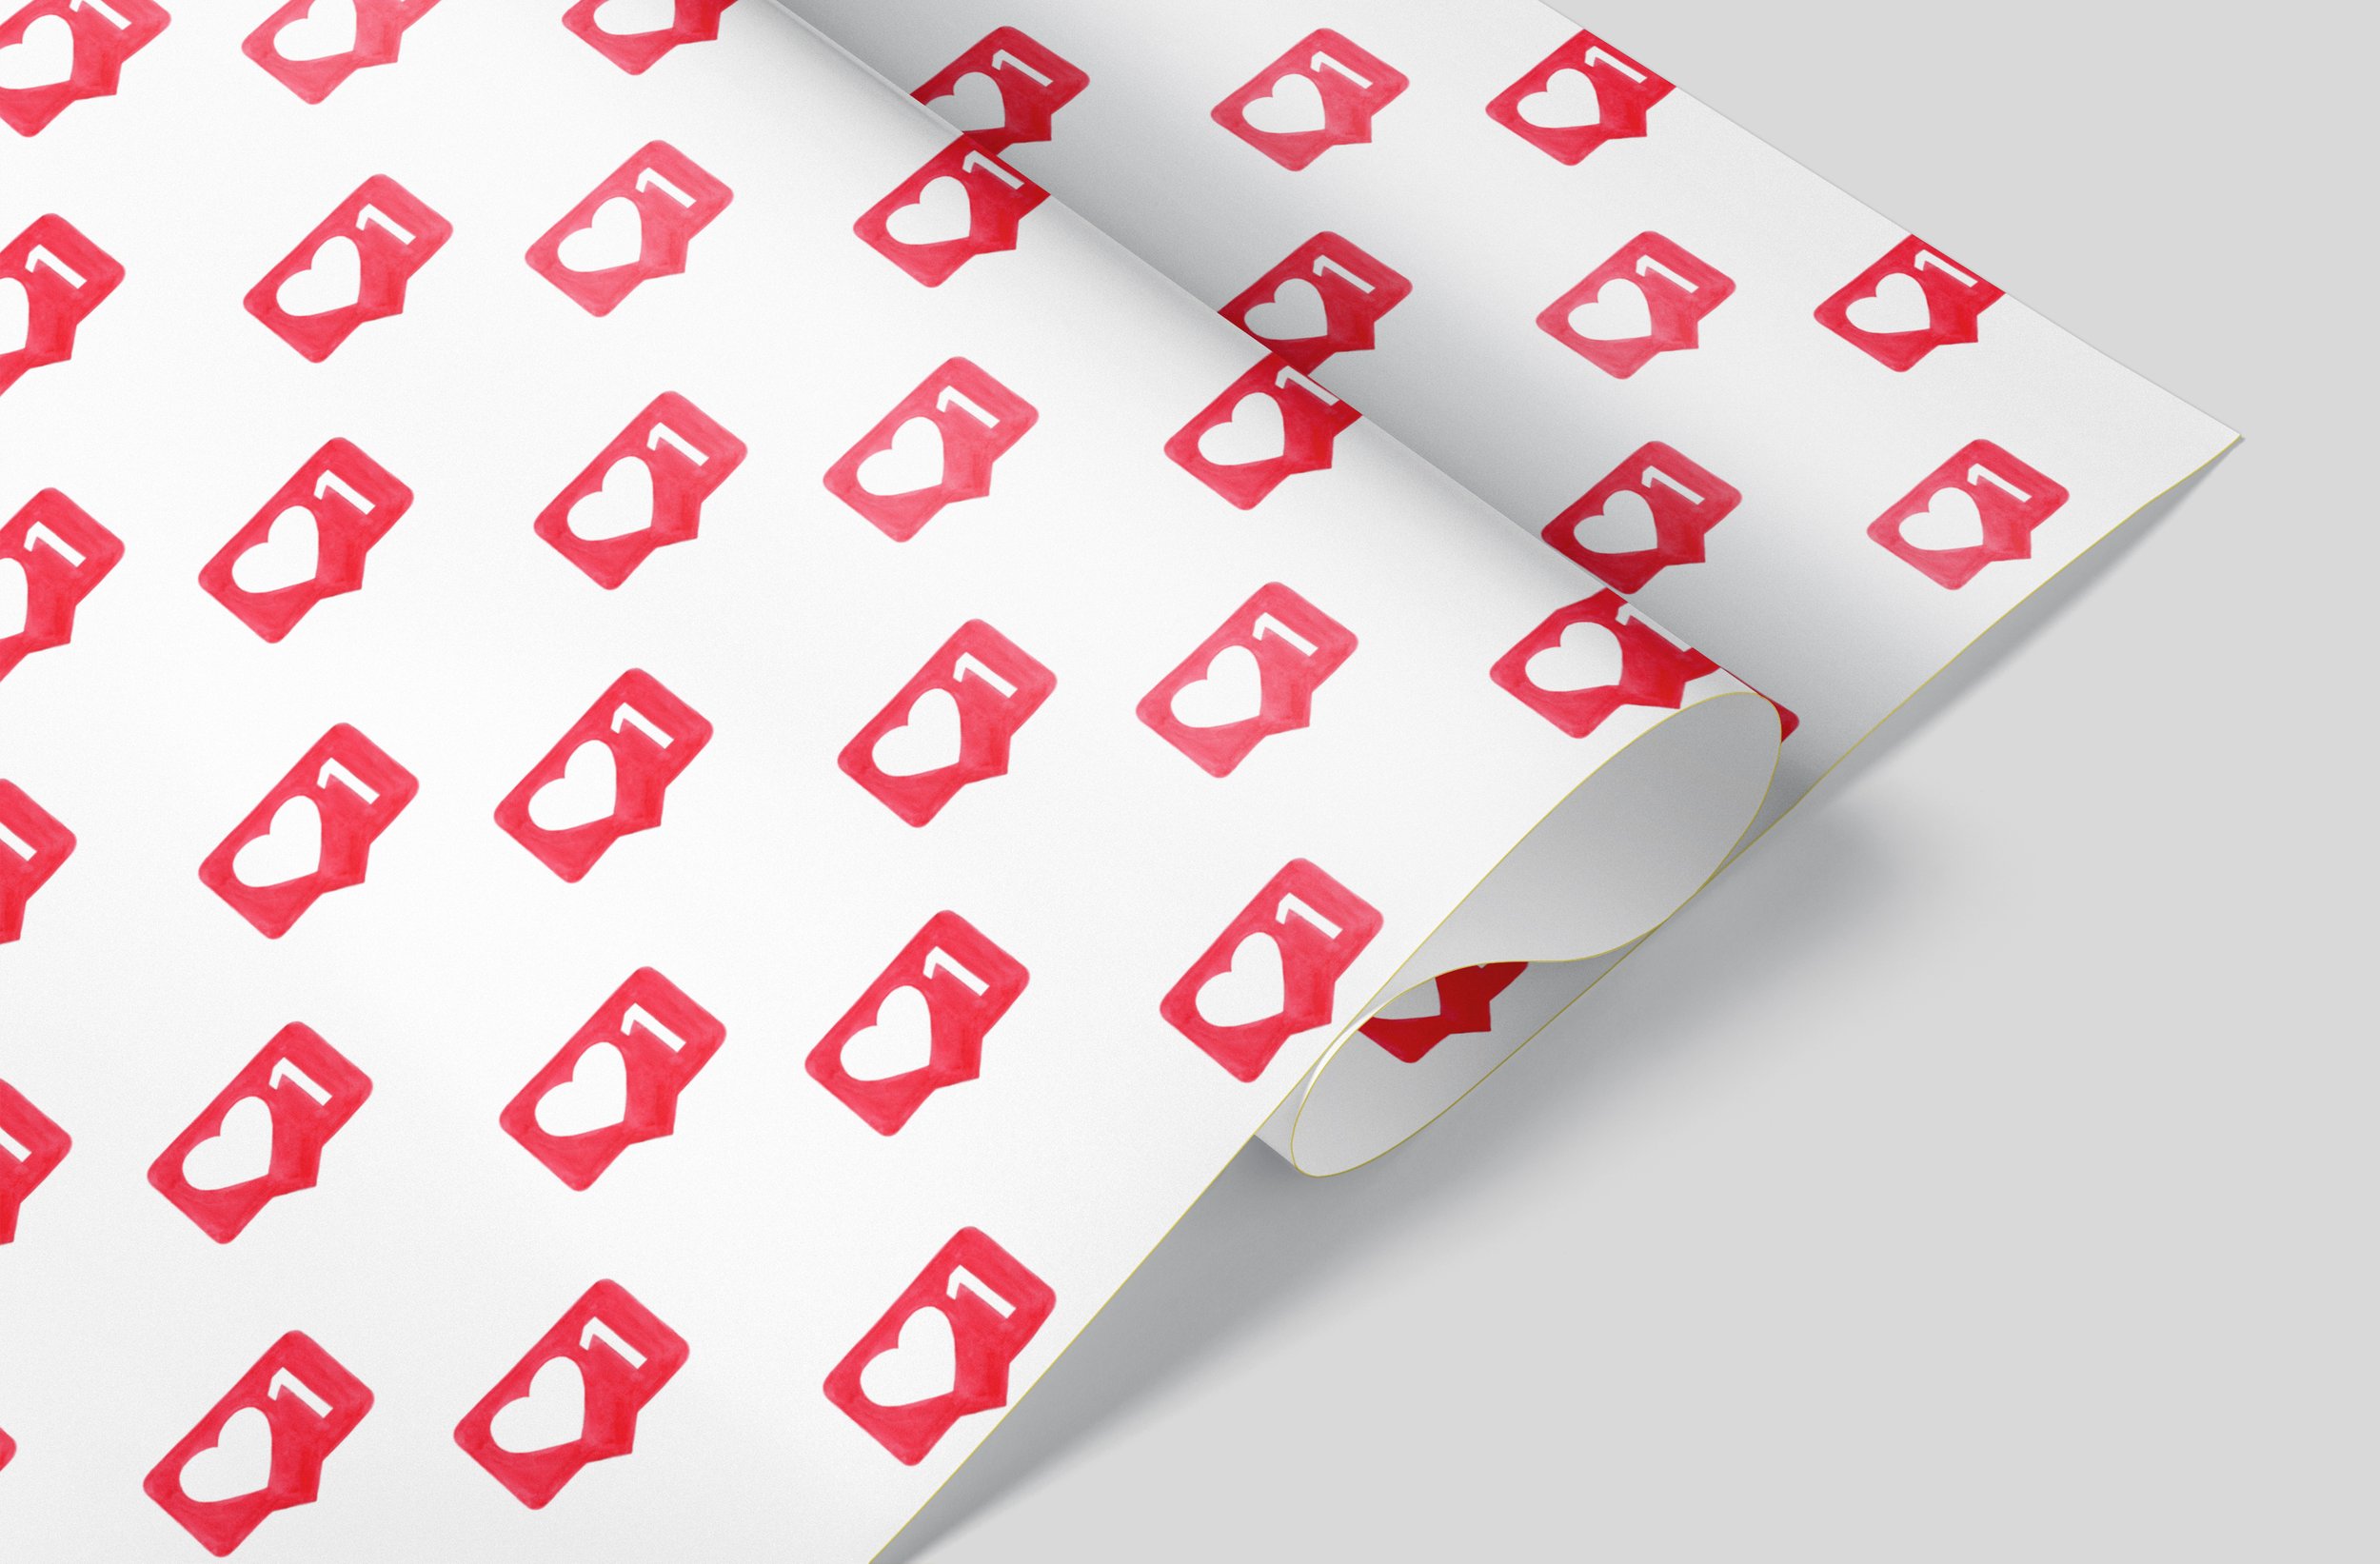 North Pole Postal Service Wrapping Paper — ERICA NORDBERG